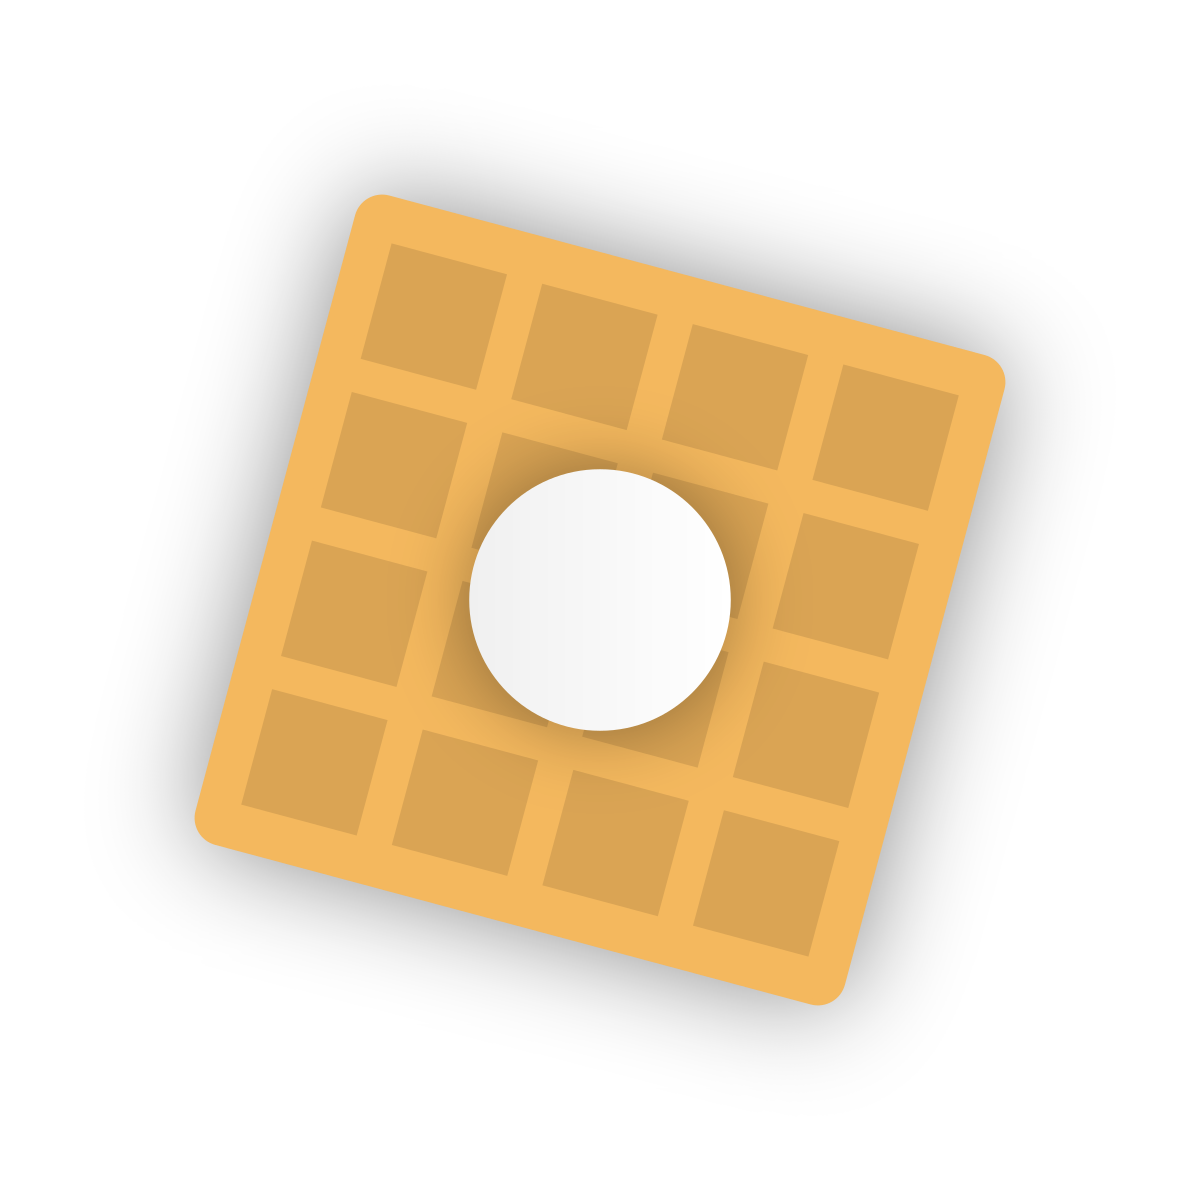 Square icon with transparent background